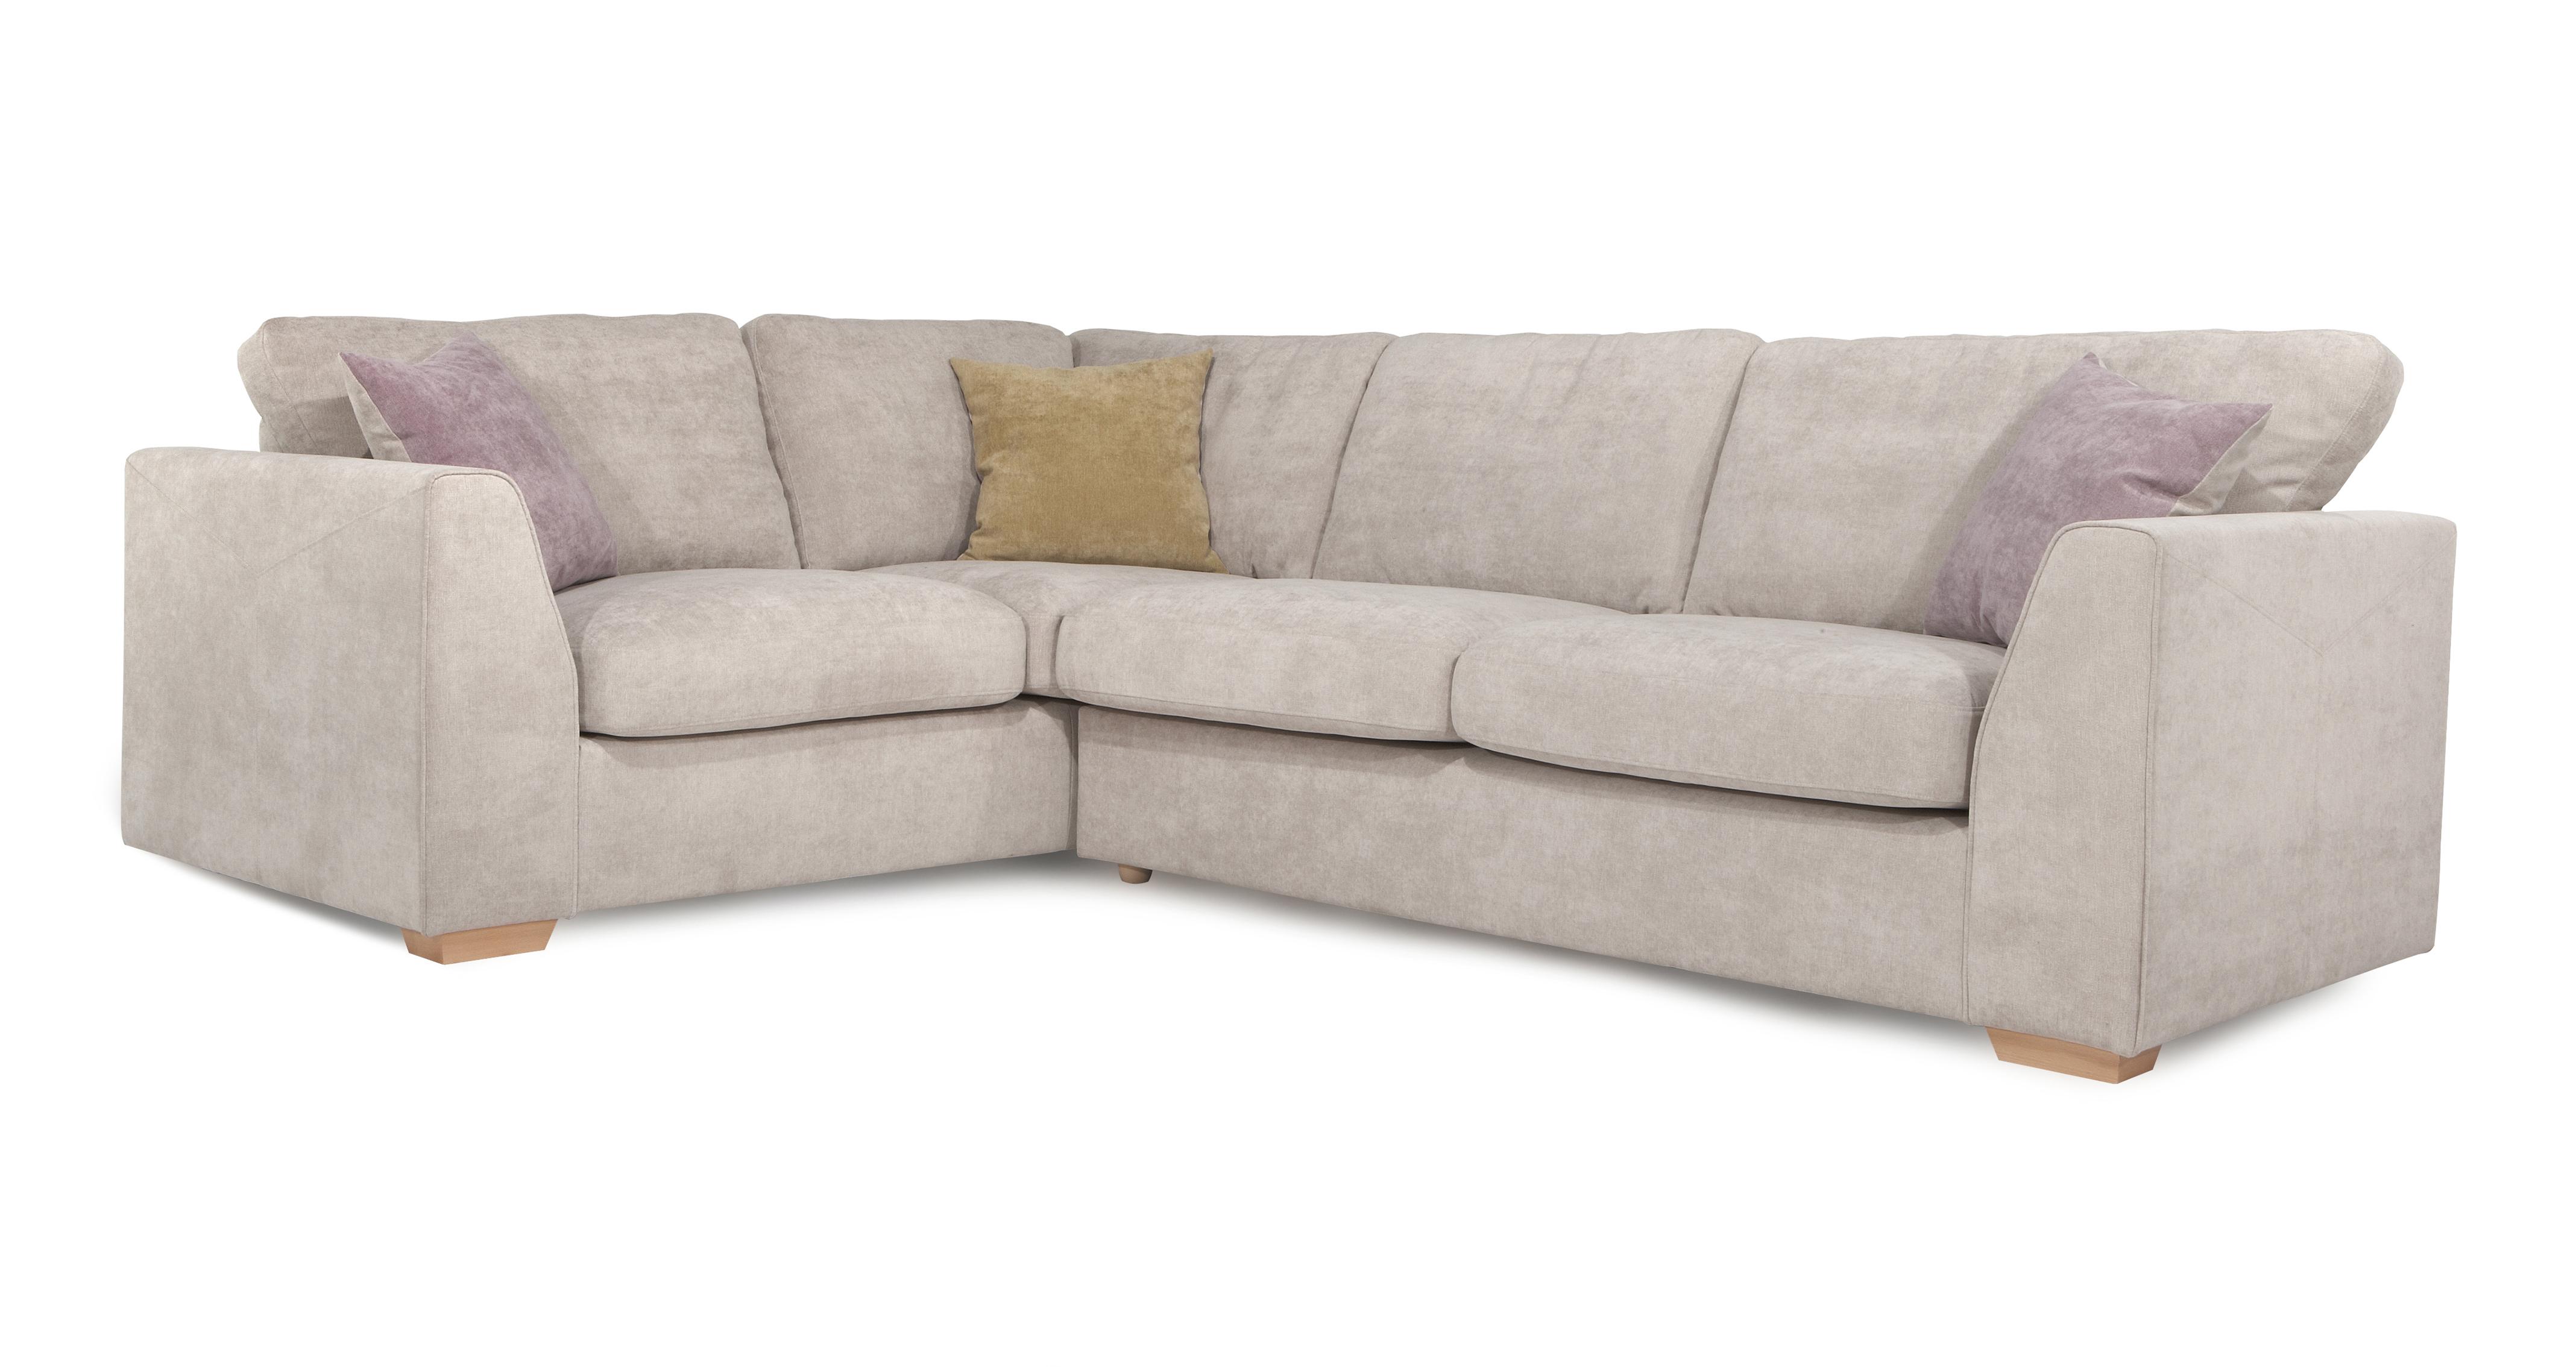 dfs blanche sofa bed